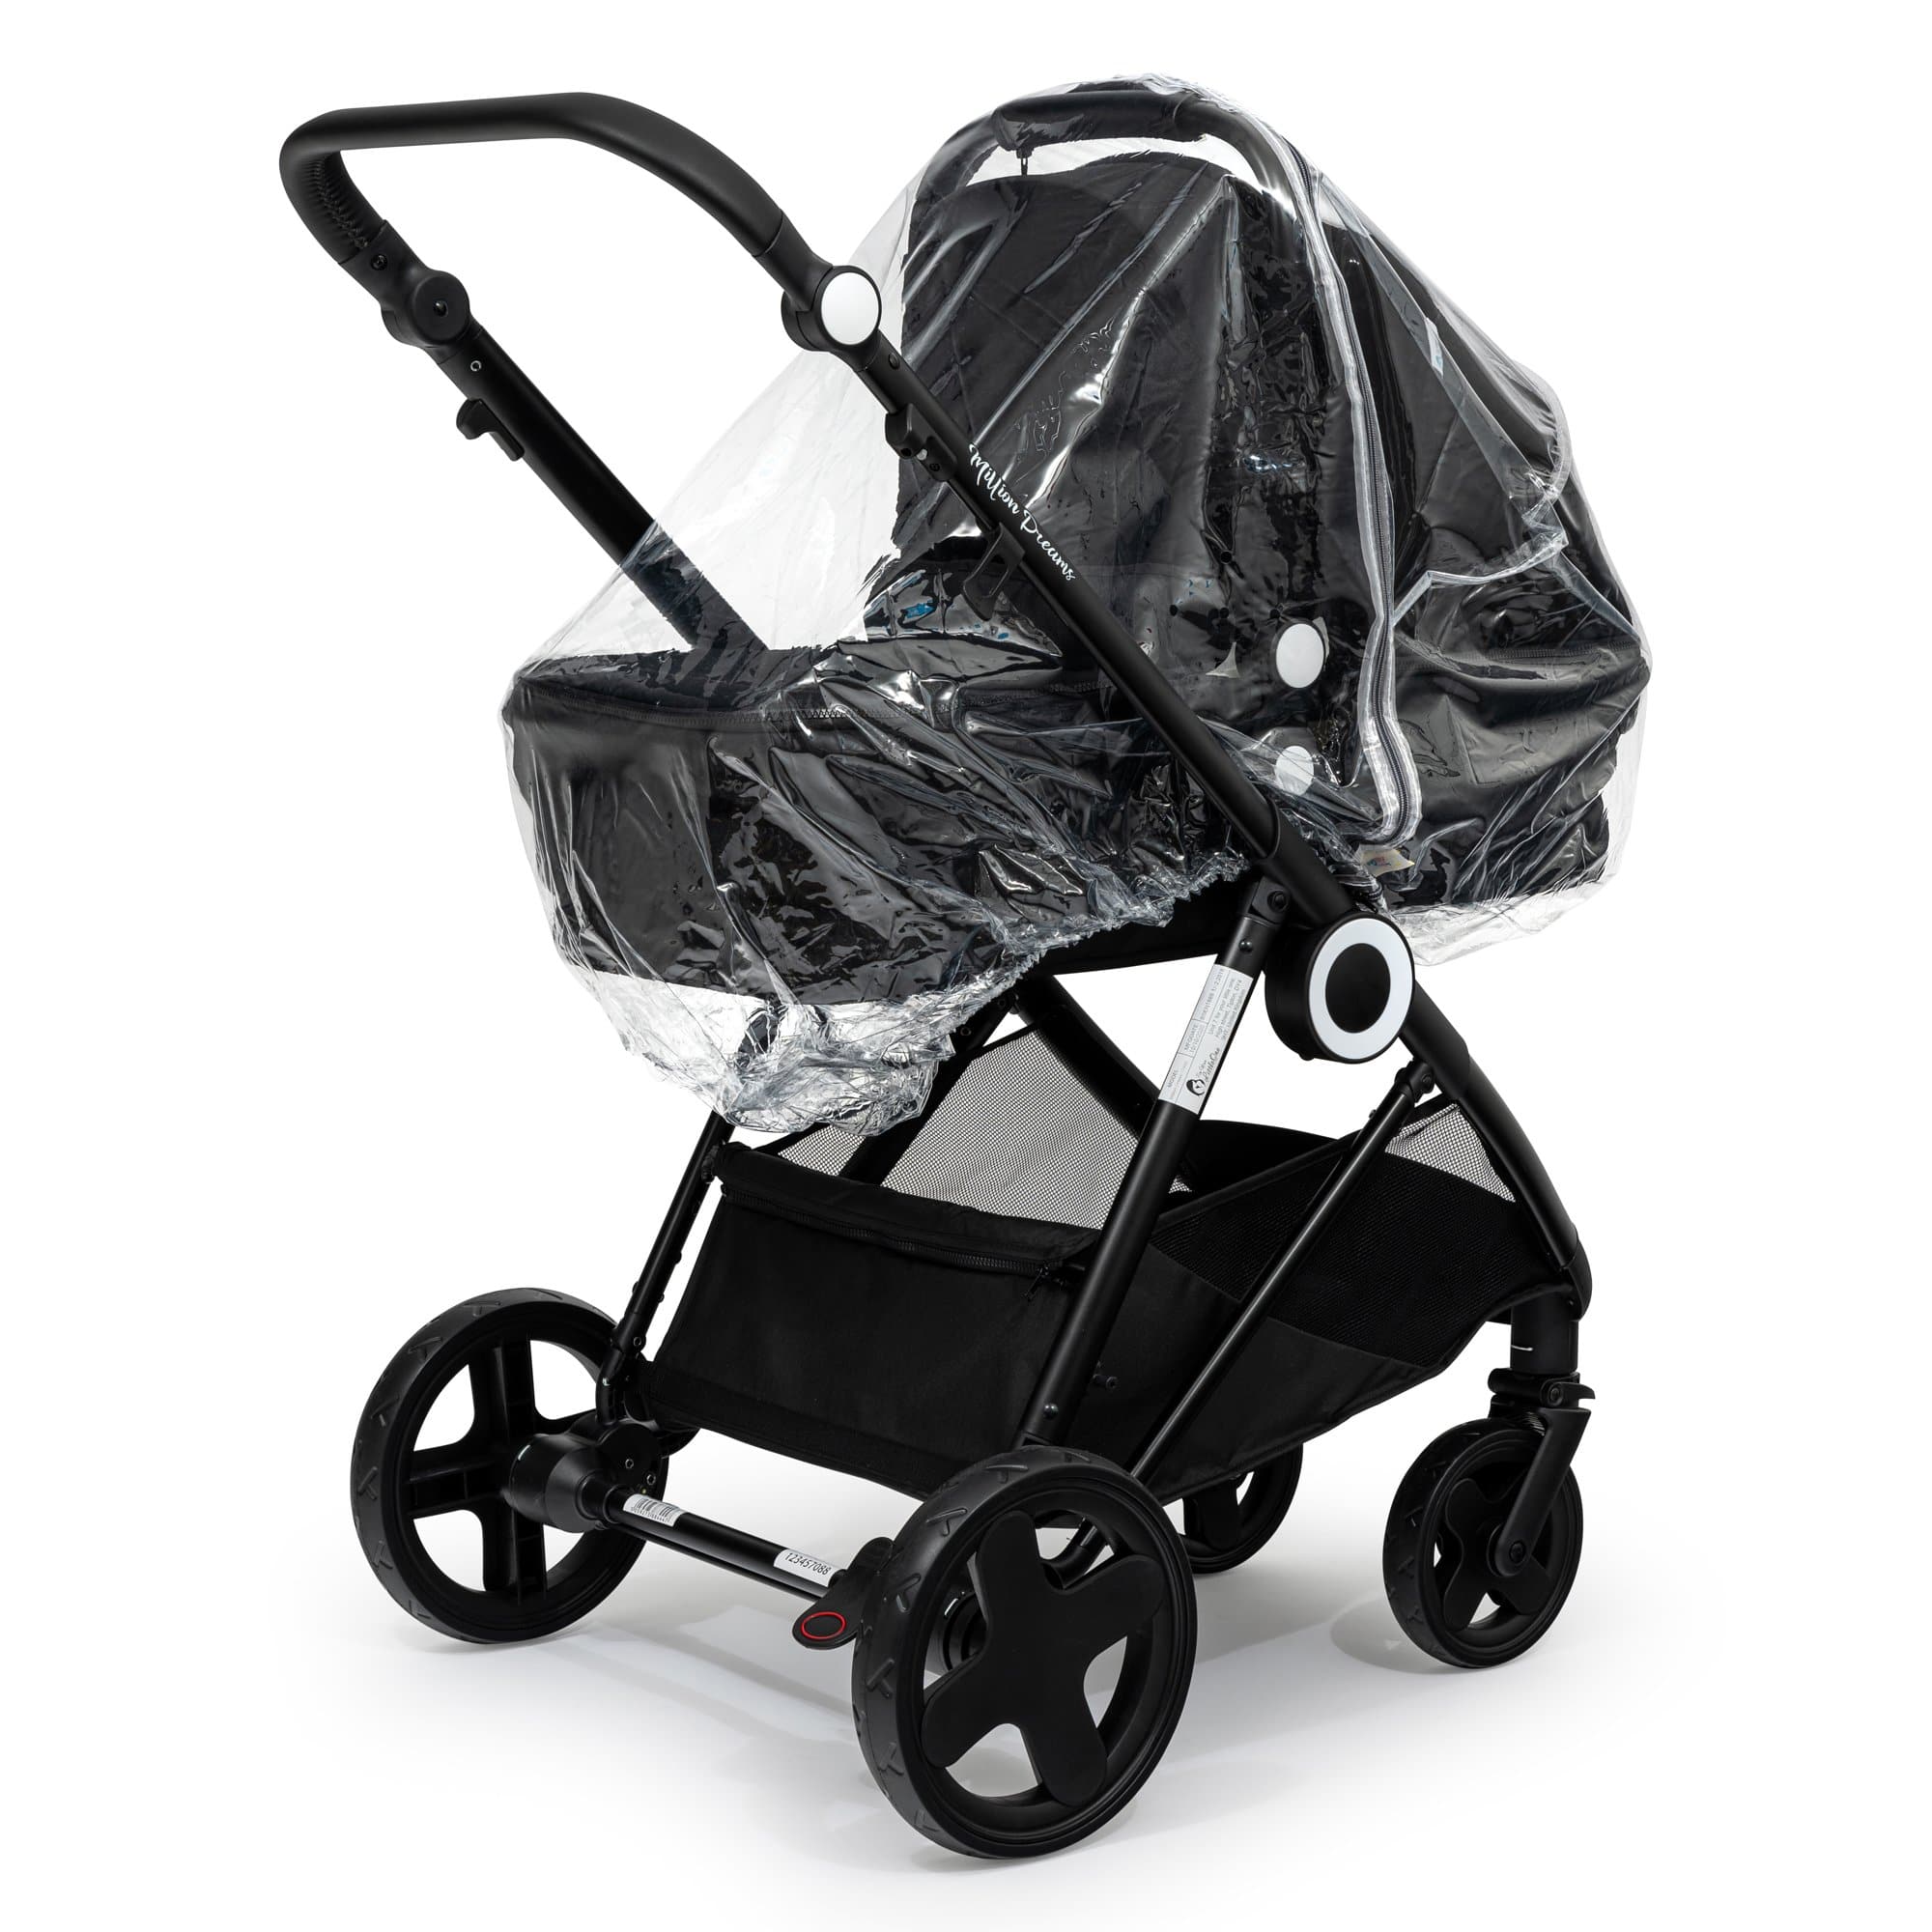 Universal Carrycot Raincover - Fits All Models - For Your Little One